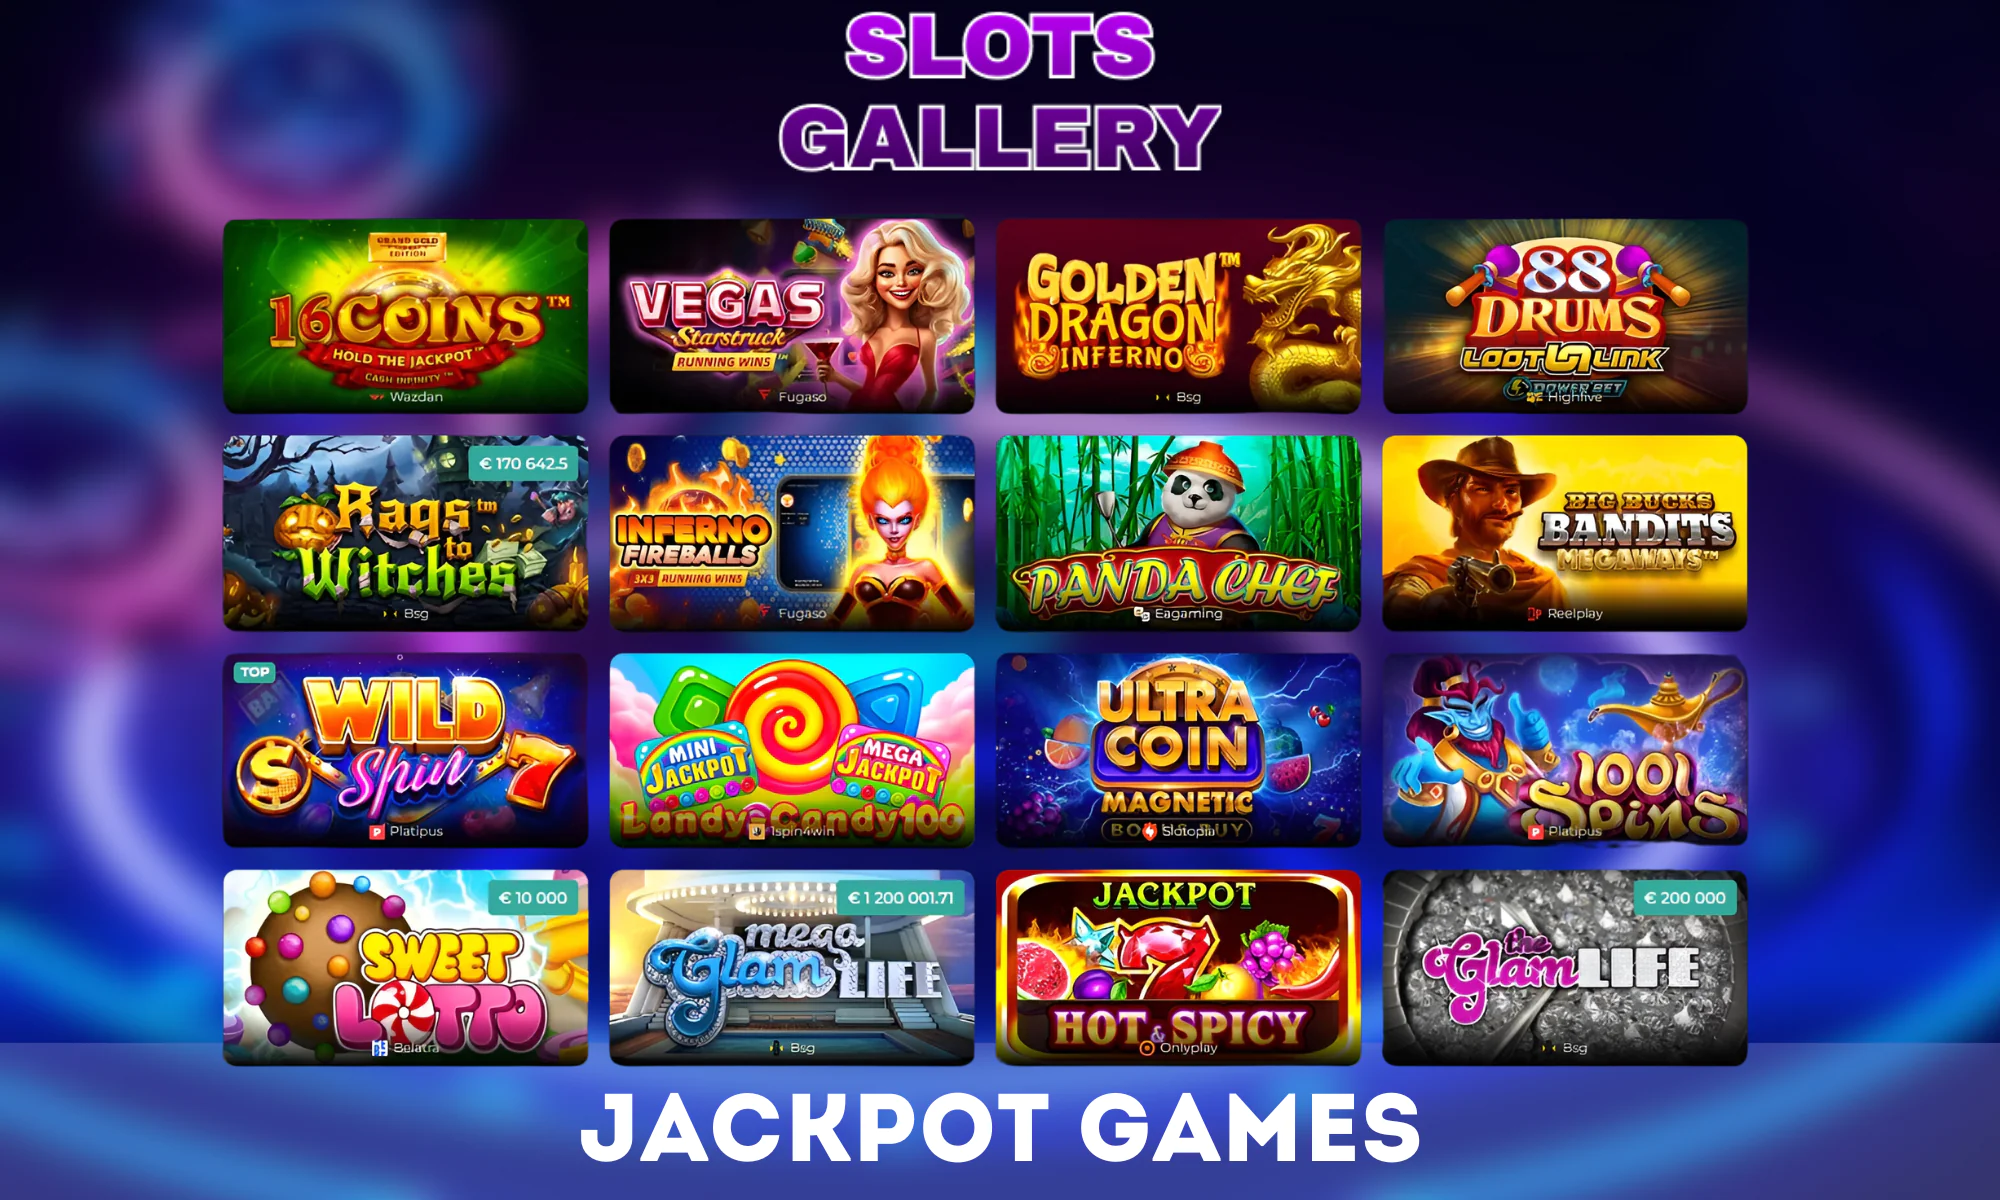 Available Jackpot Games on the official website